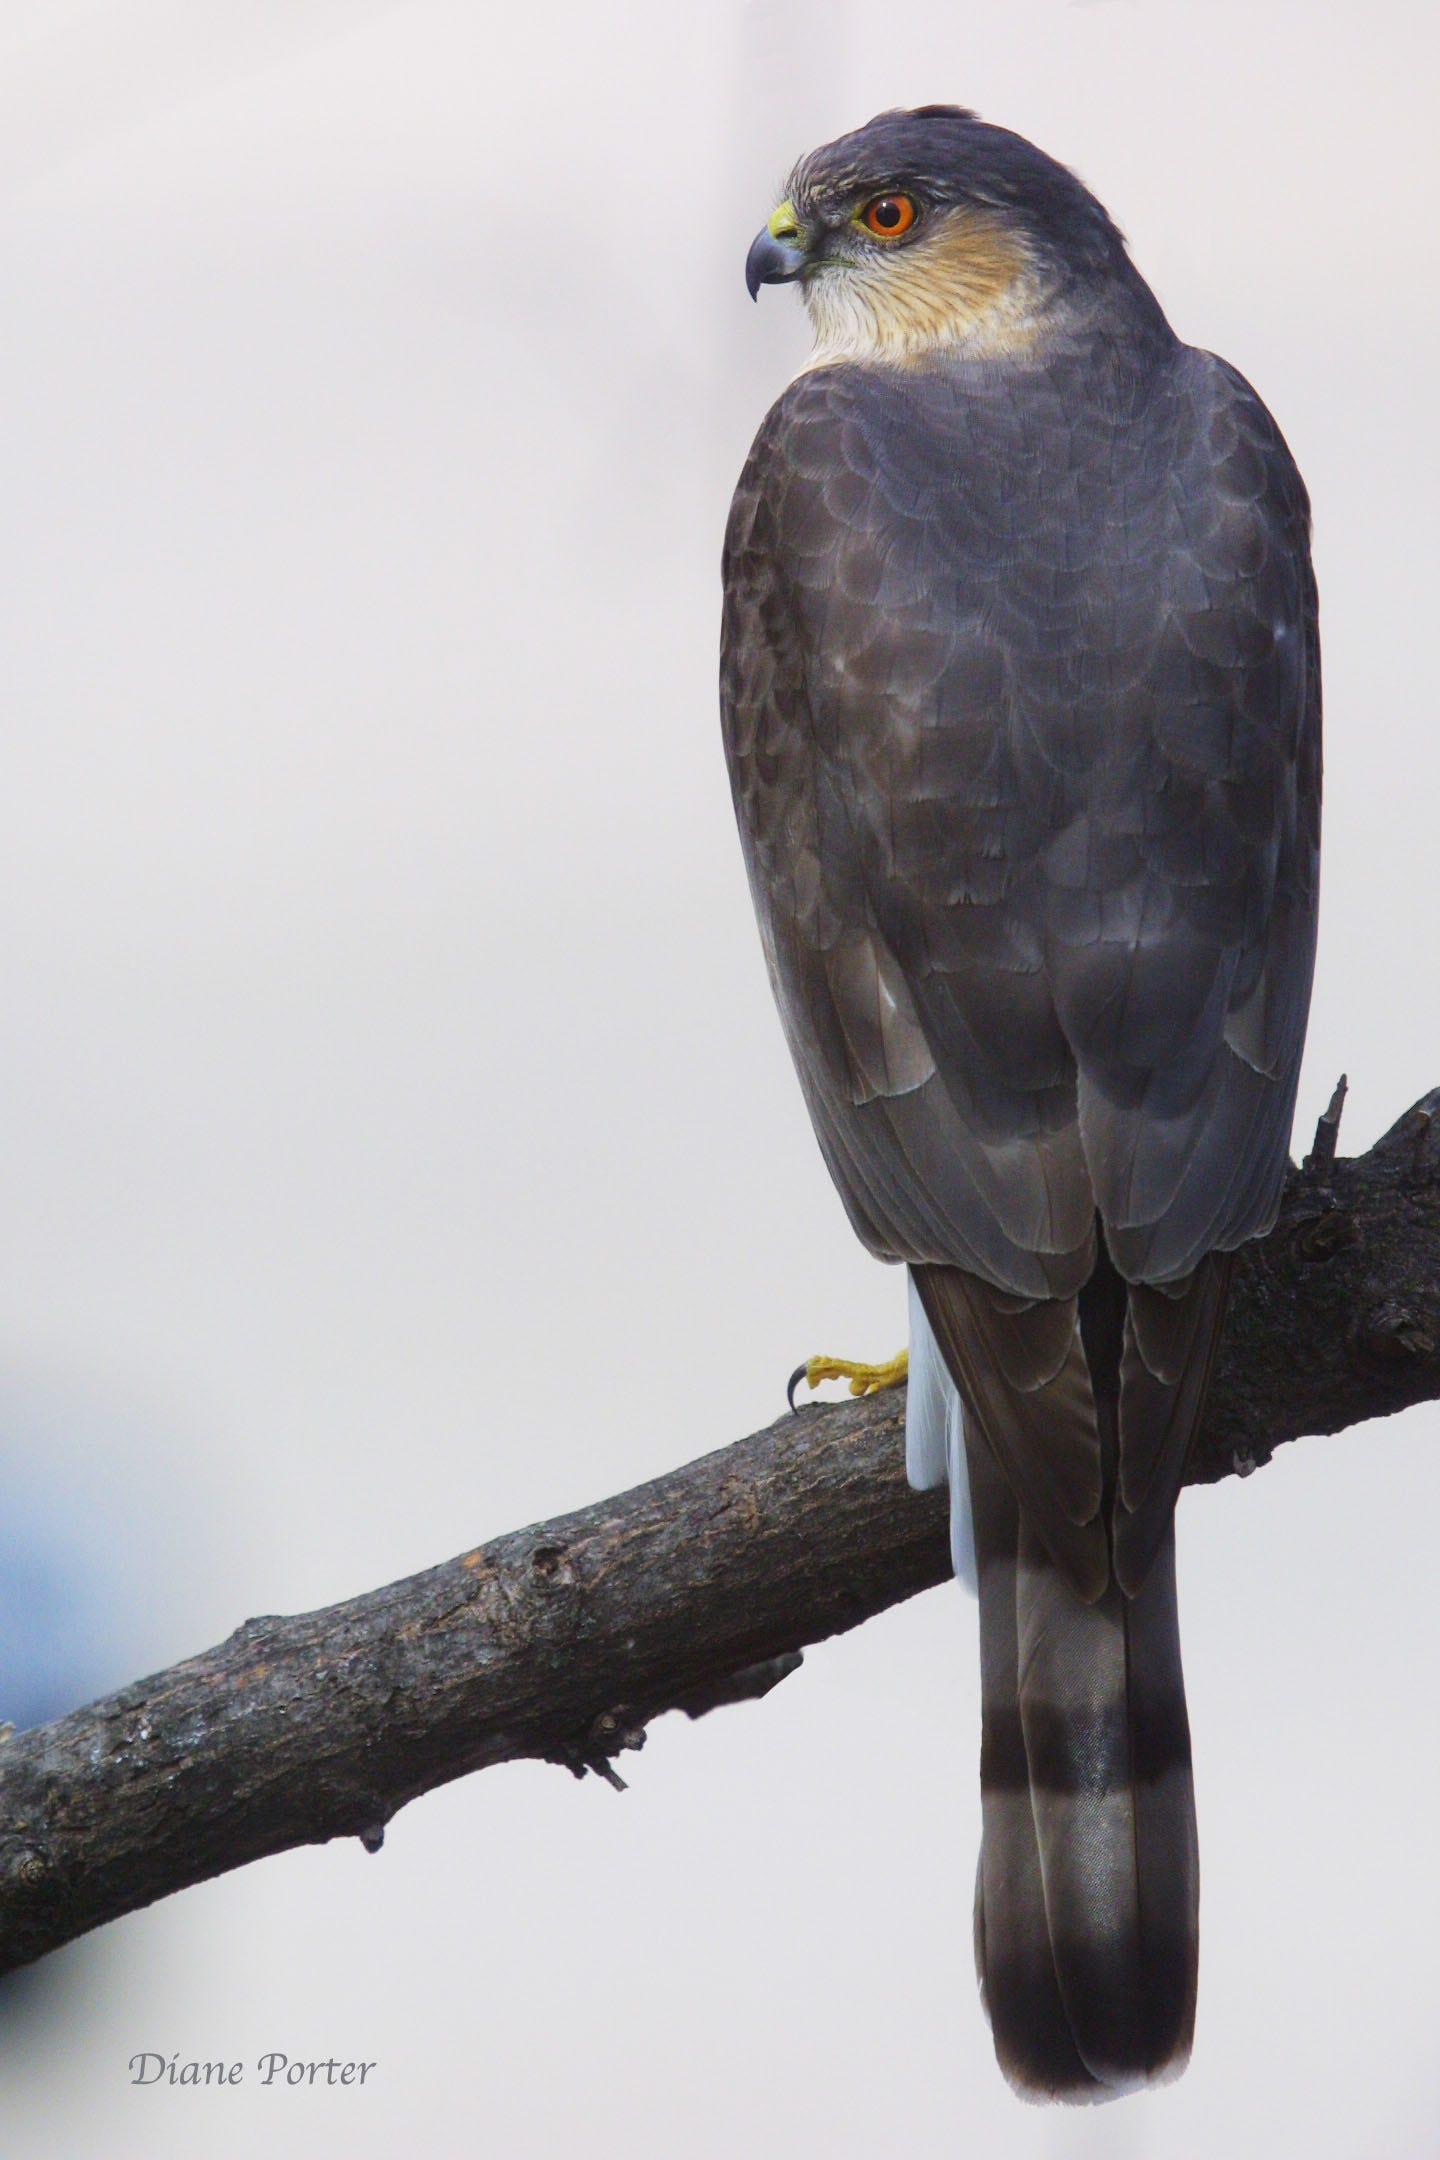 Adult Sharp-shinned Hawk from the back, with head in profile